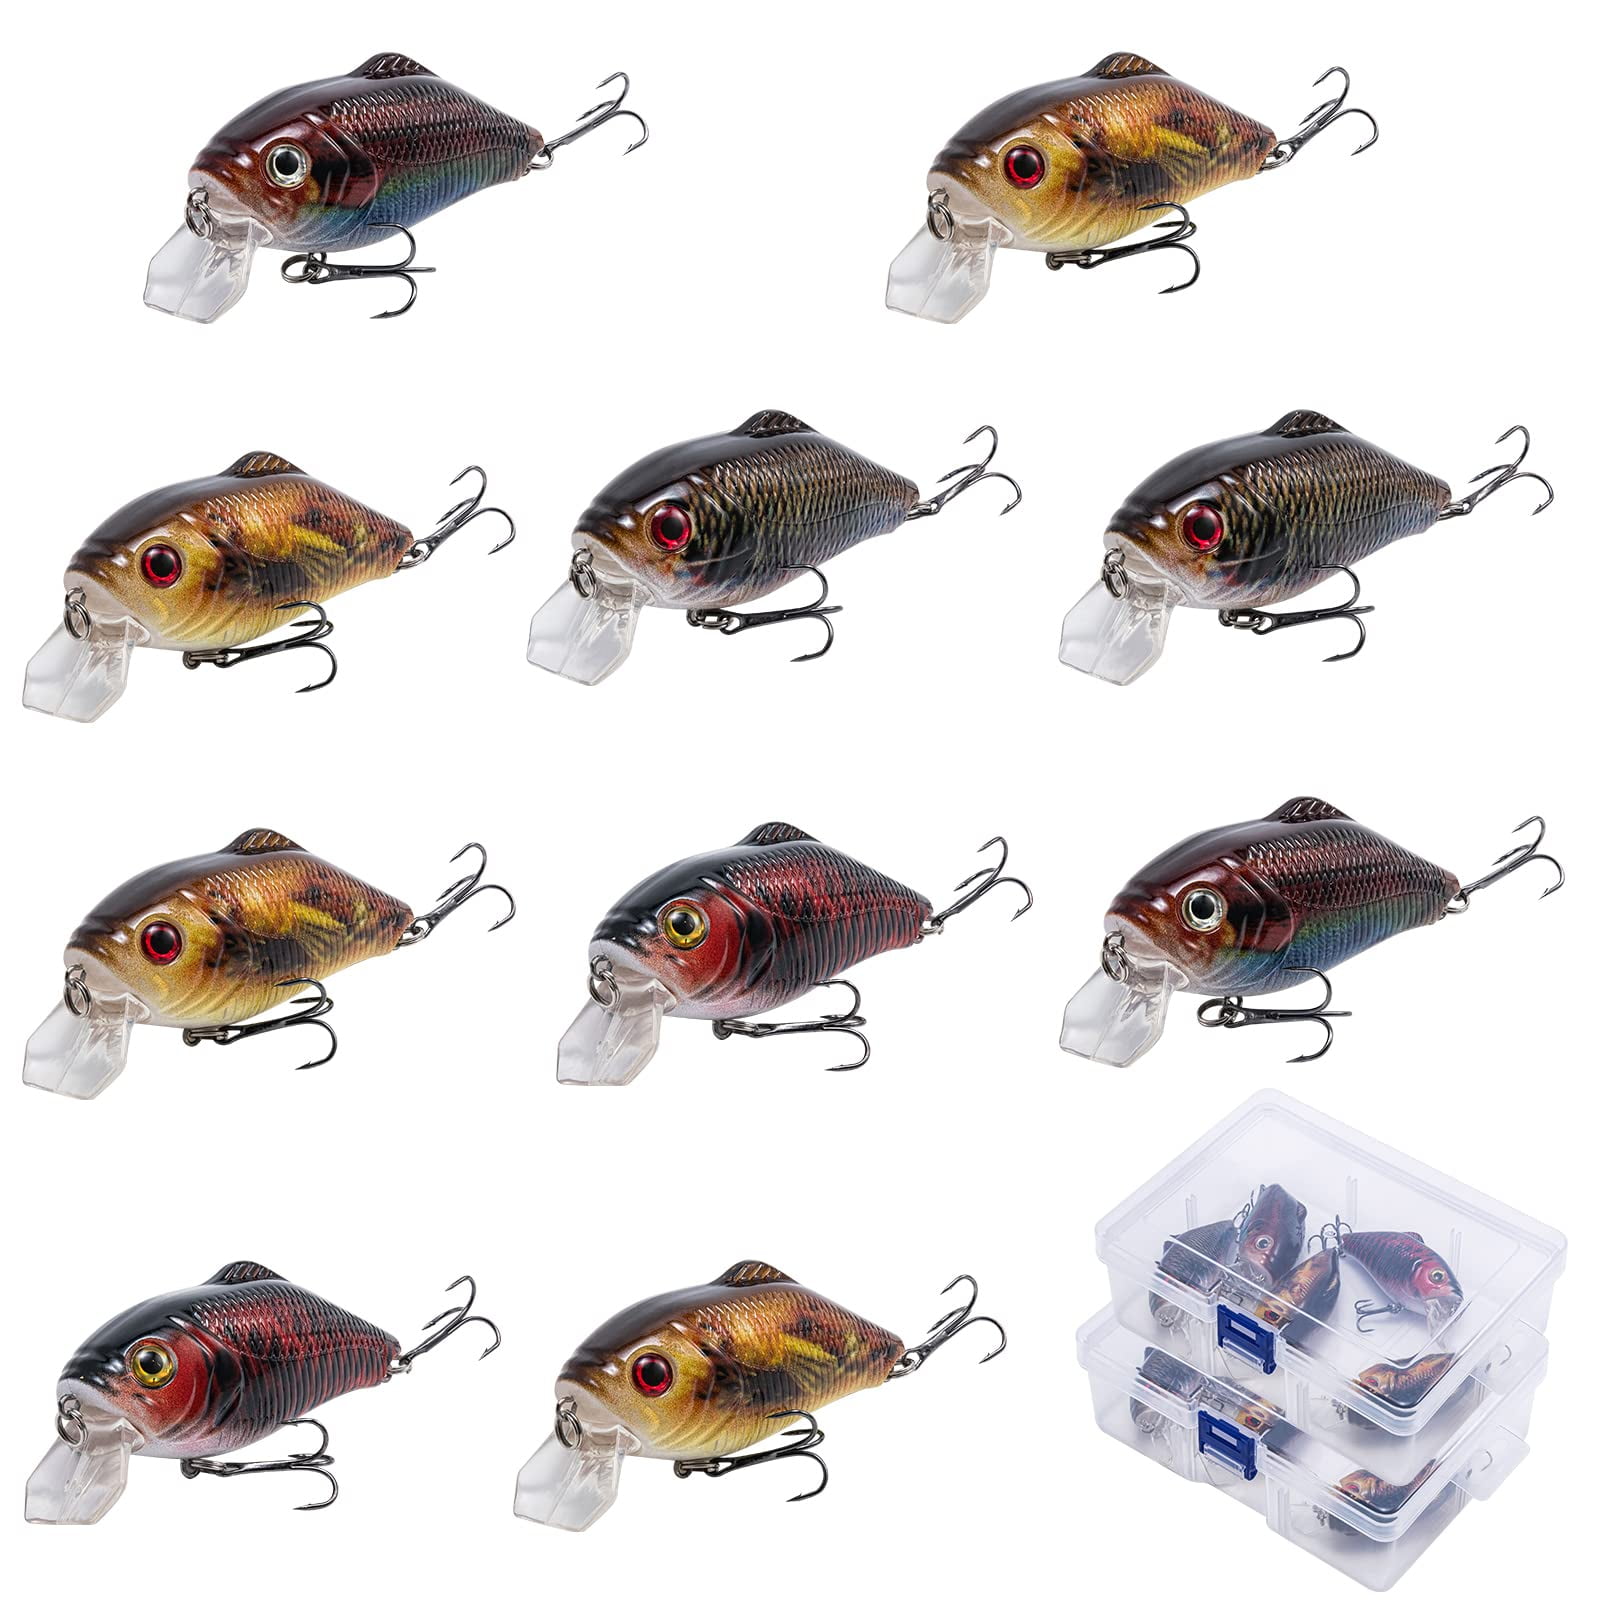 Goture Minnow Fishing Lures, Crankbaits Hard Baits with Tackle Box,  Fast/Slow Sinking Minnow Lures Freshwater Saltwater, Topwater Pencil  Fishing Lures